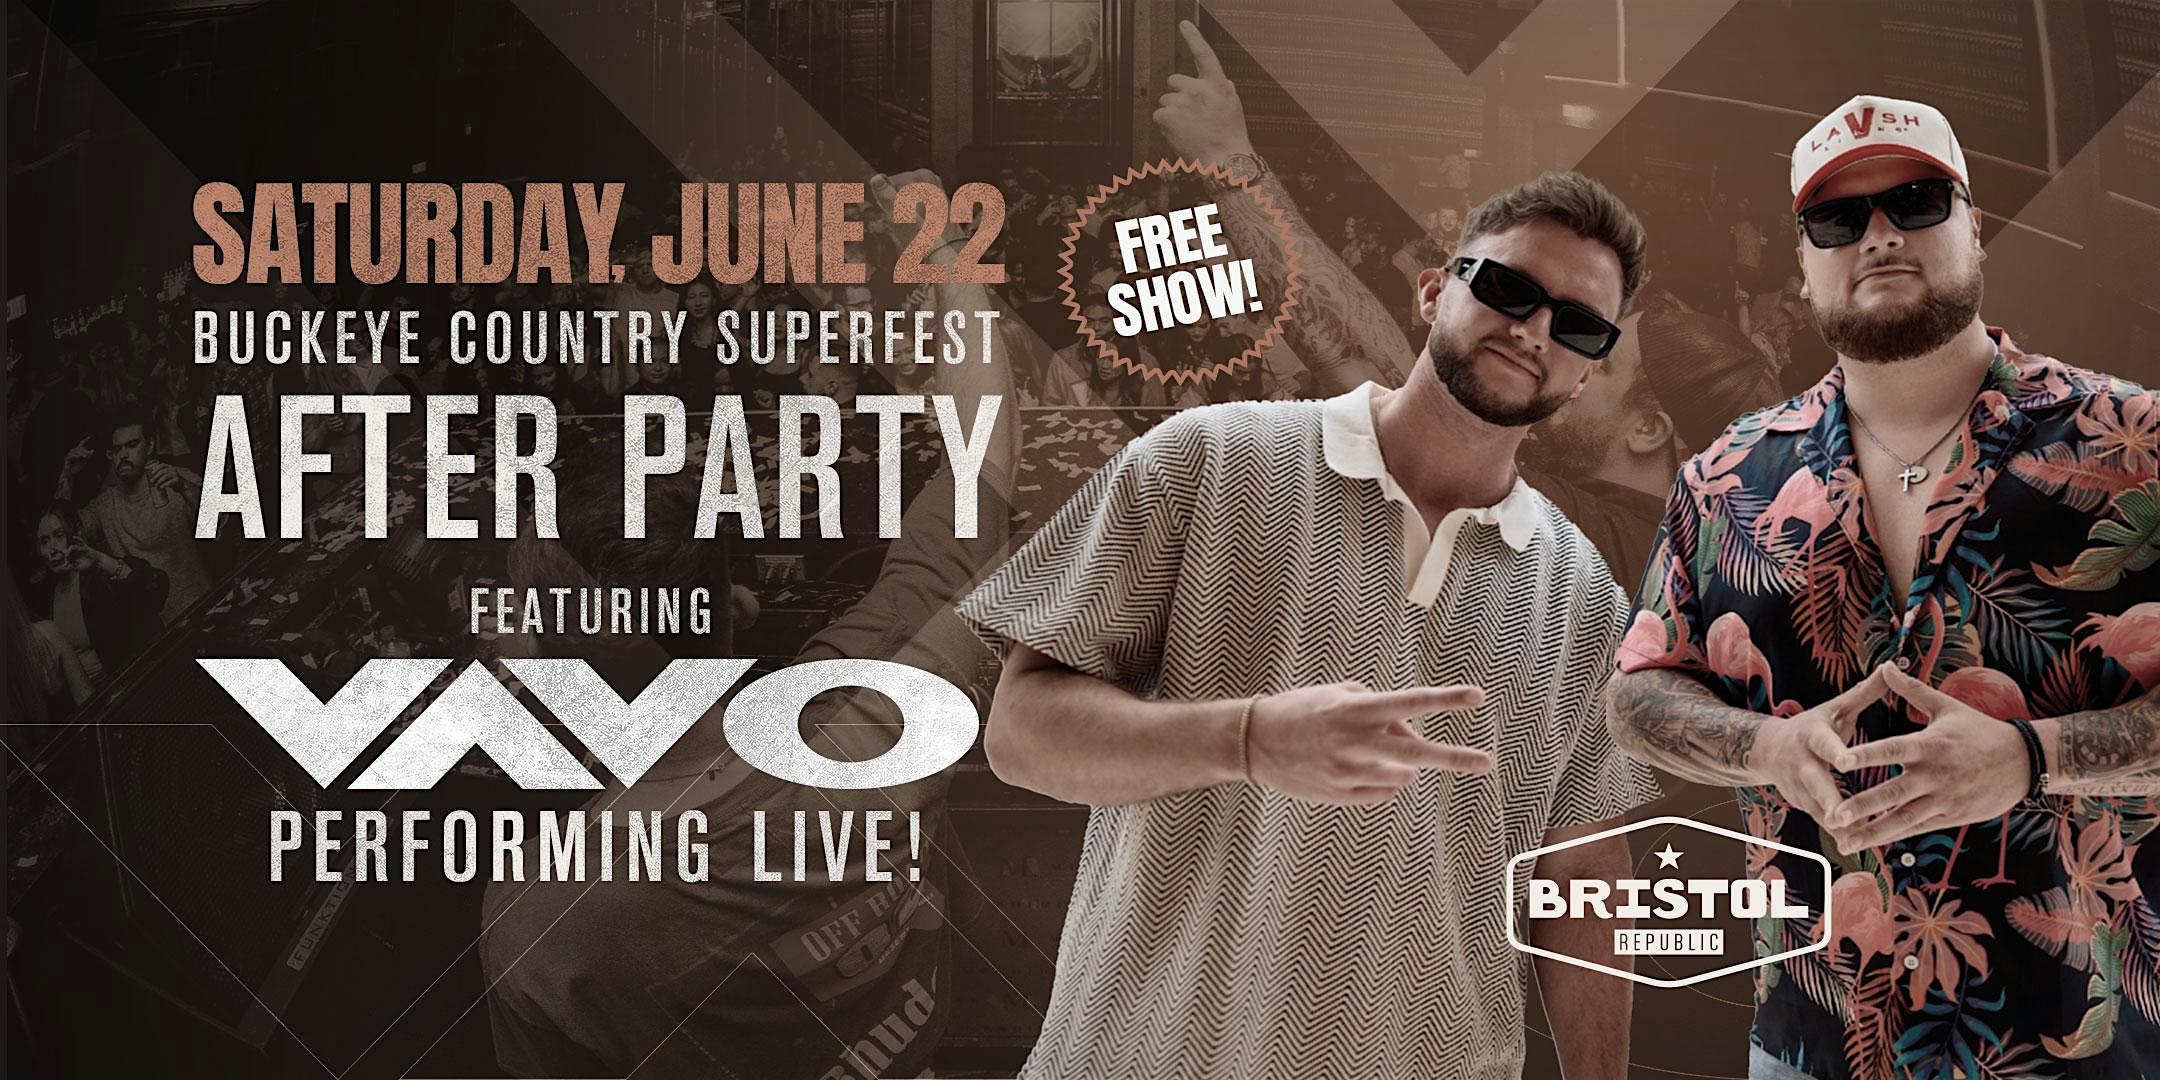 Buckeye Country Superfest Afterparty feat. VAVO Performing Live